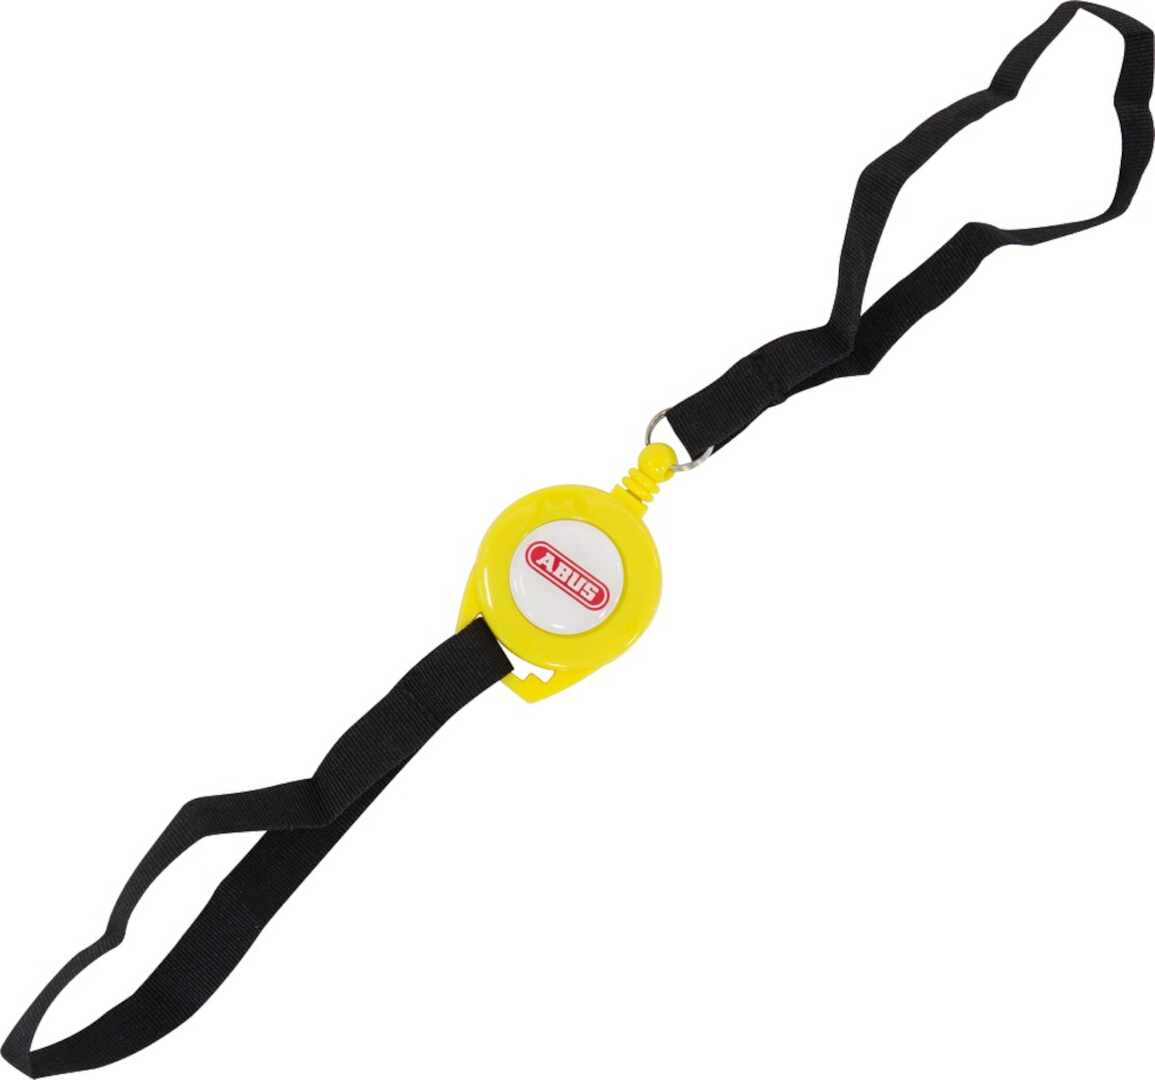 ABUS Memo Roll Up Cable Reminder Cable, black-yellow, black-yellow, Size One Size